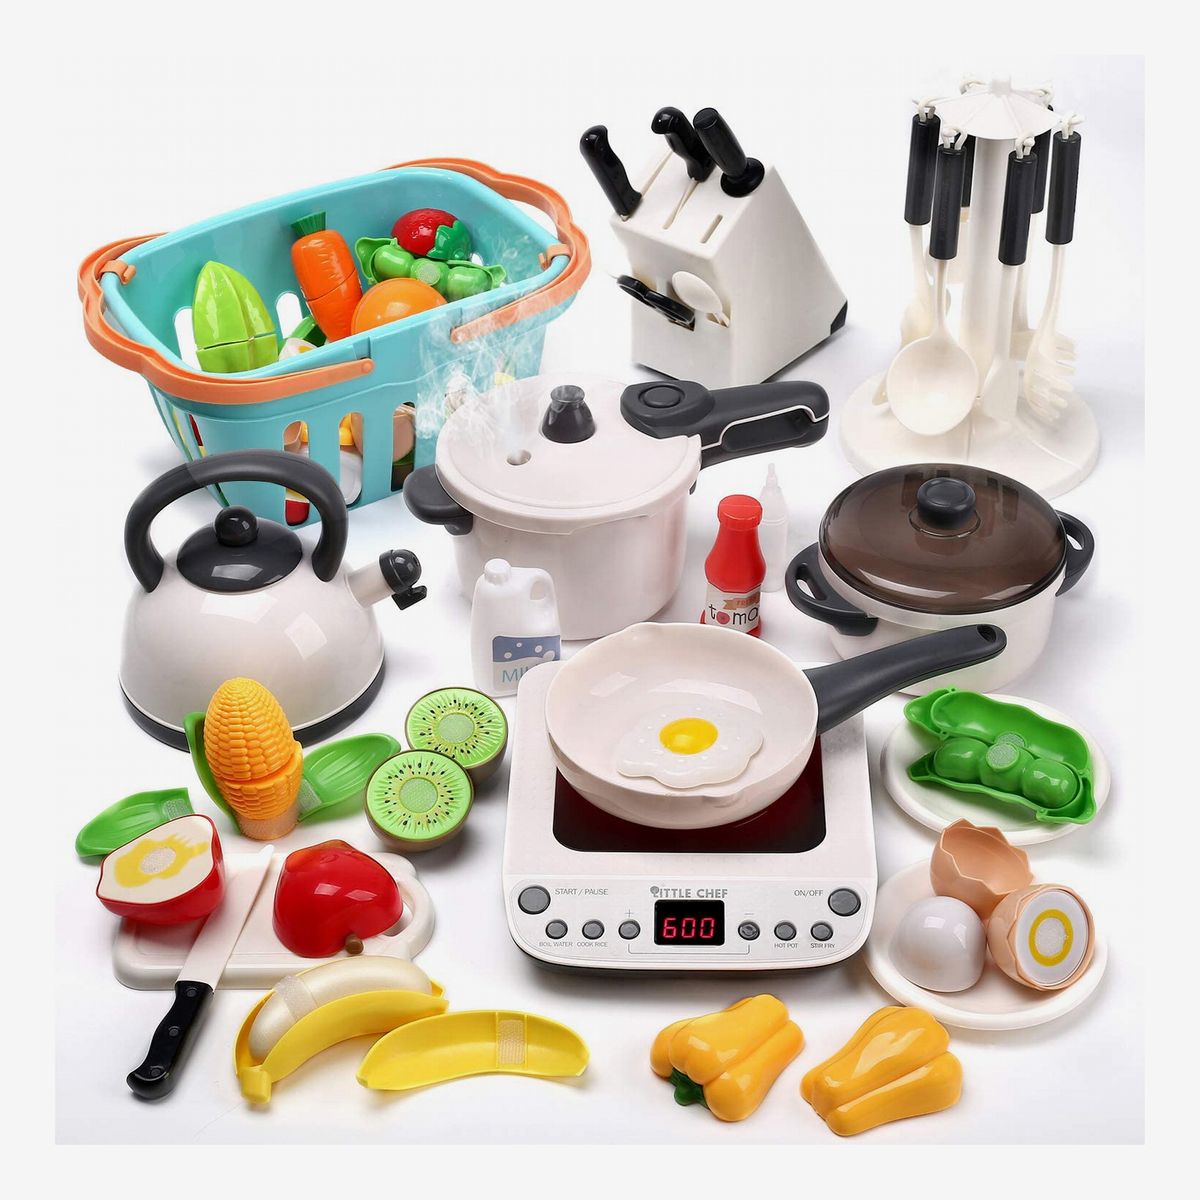 Kitchen Play Kids Set Toy Cooking Food Pretend Role Toys Gift Cookware Accessory 